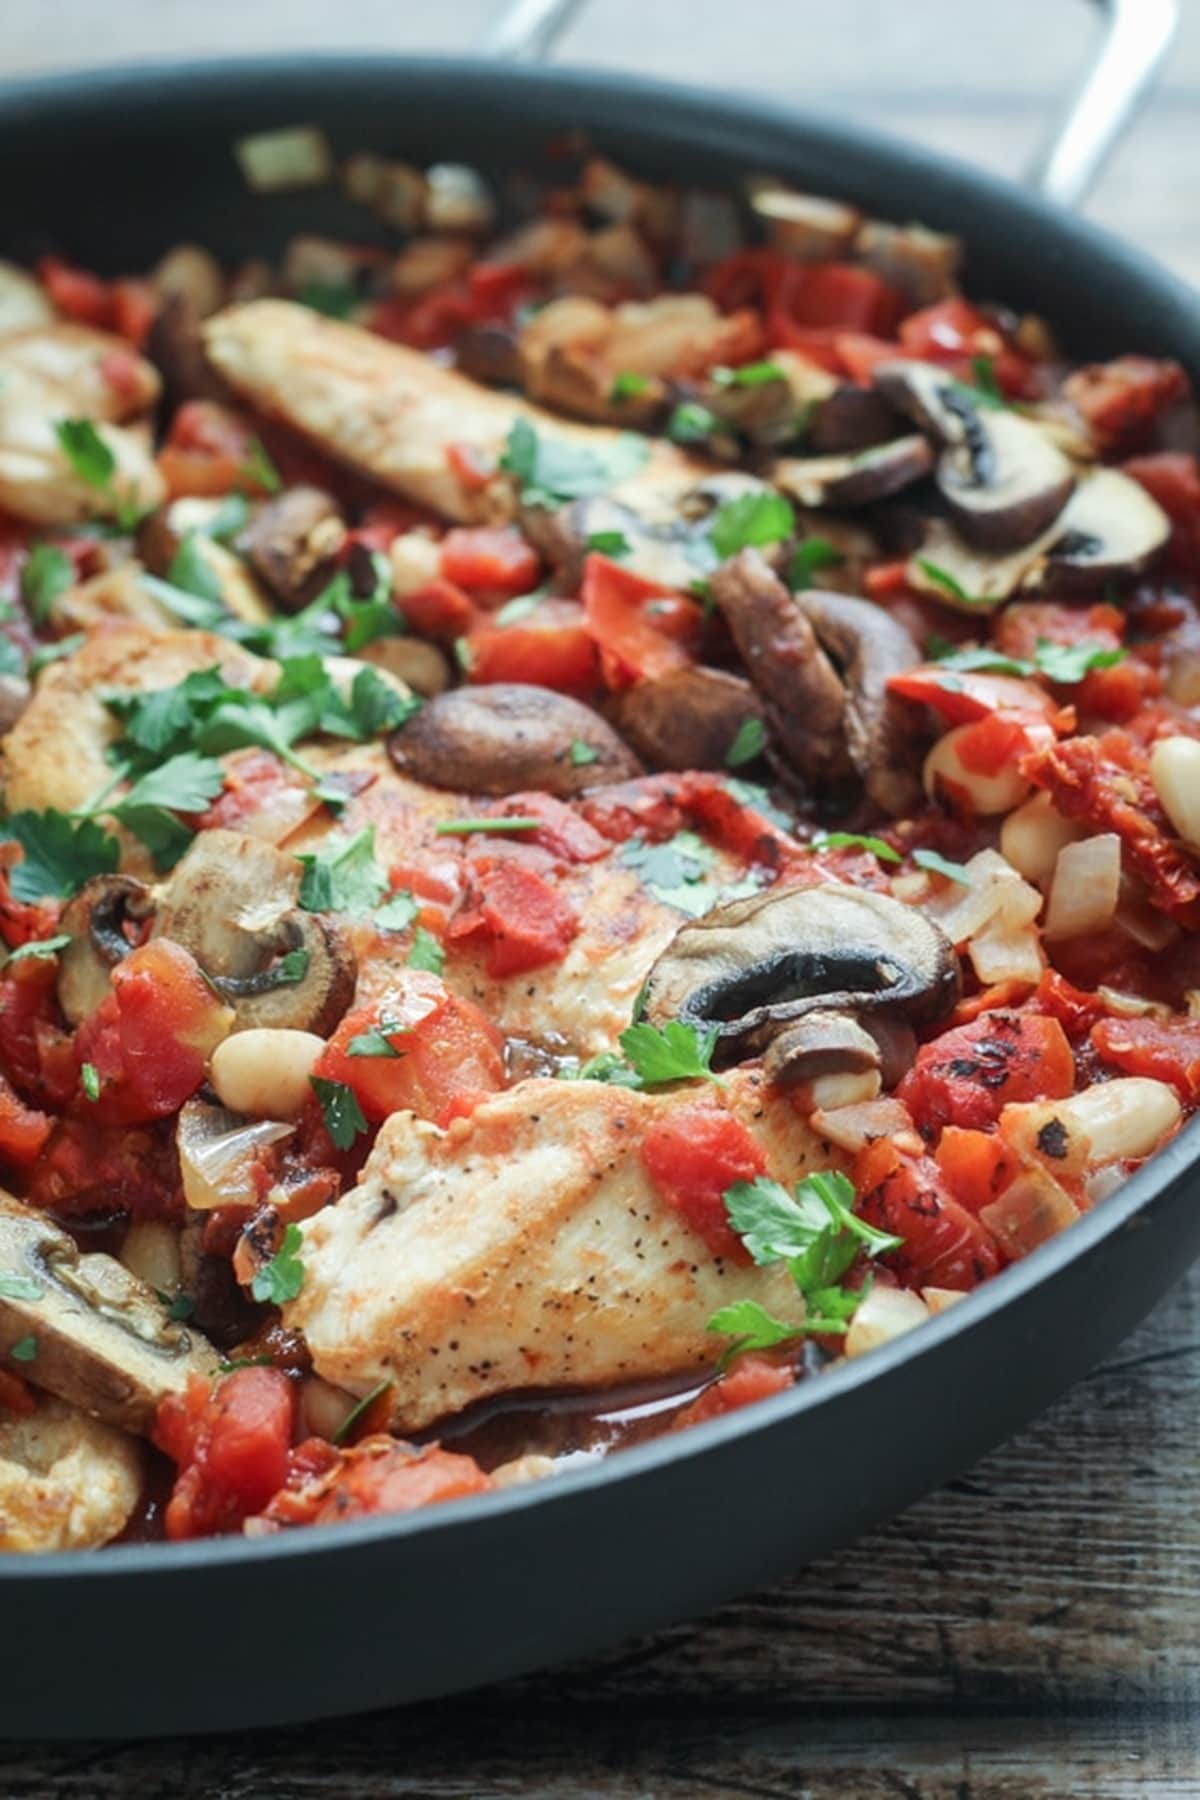 Tuscan chicken skillet served on a table.